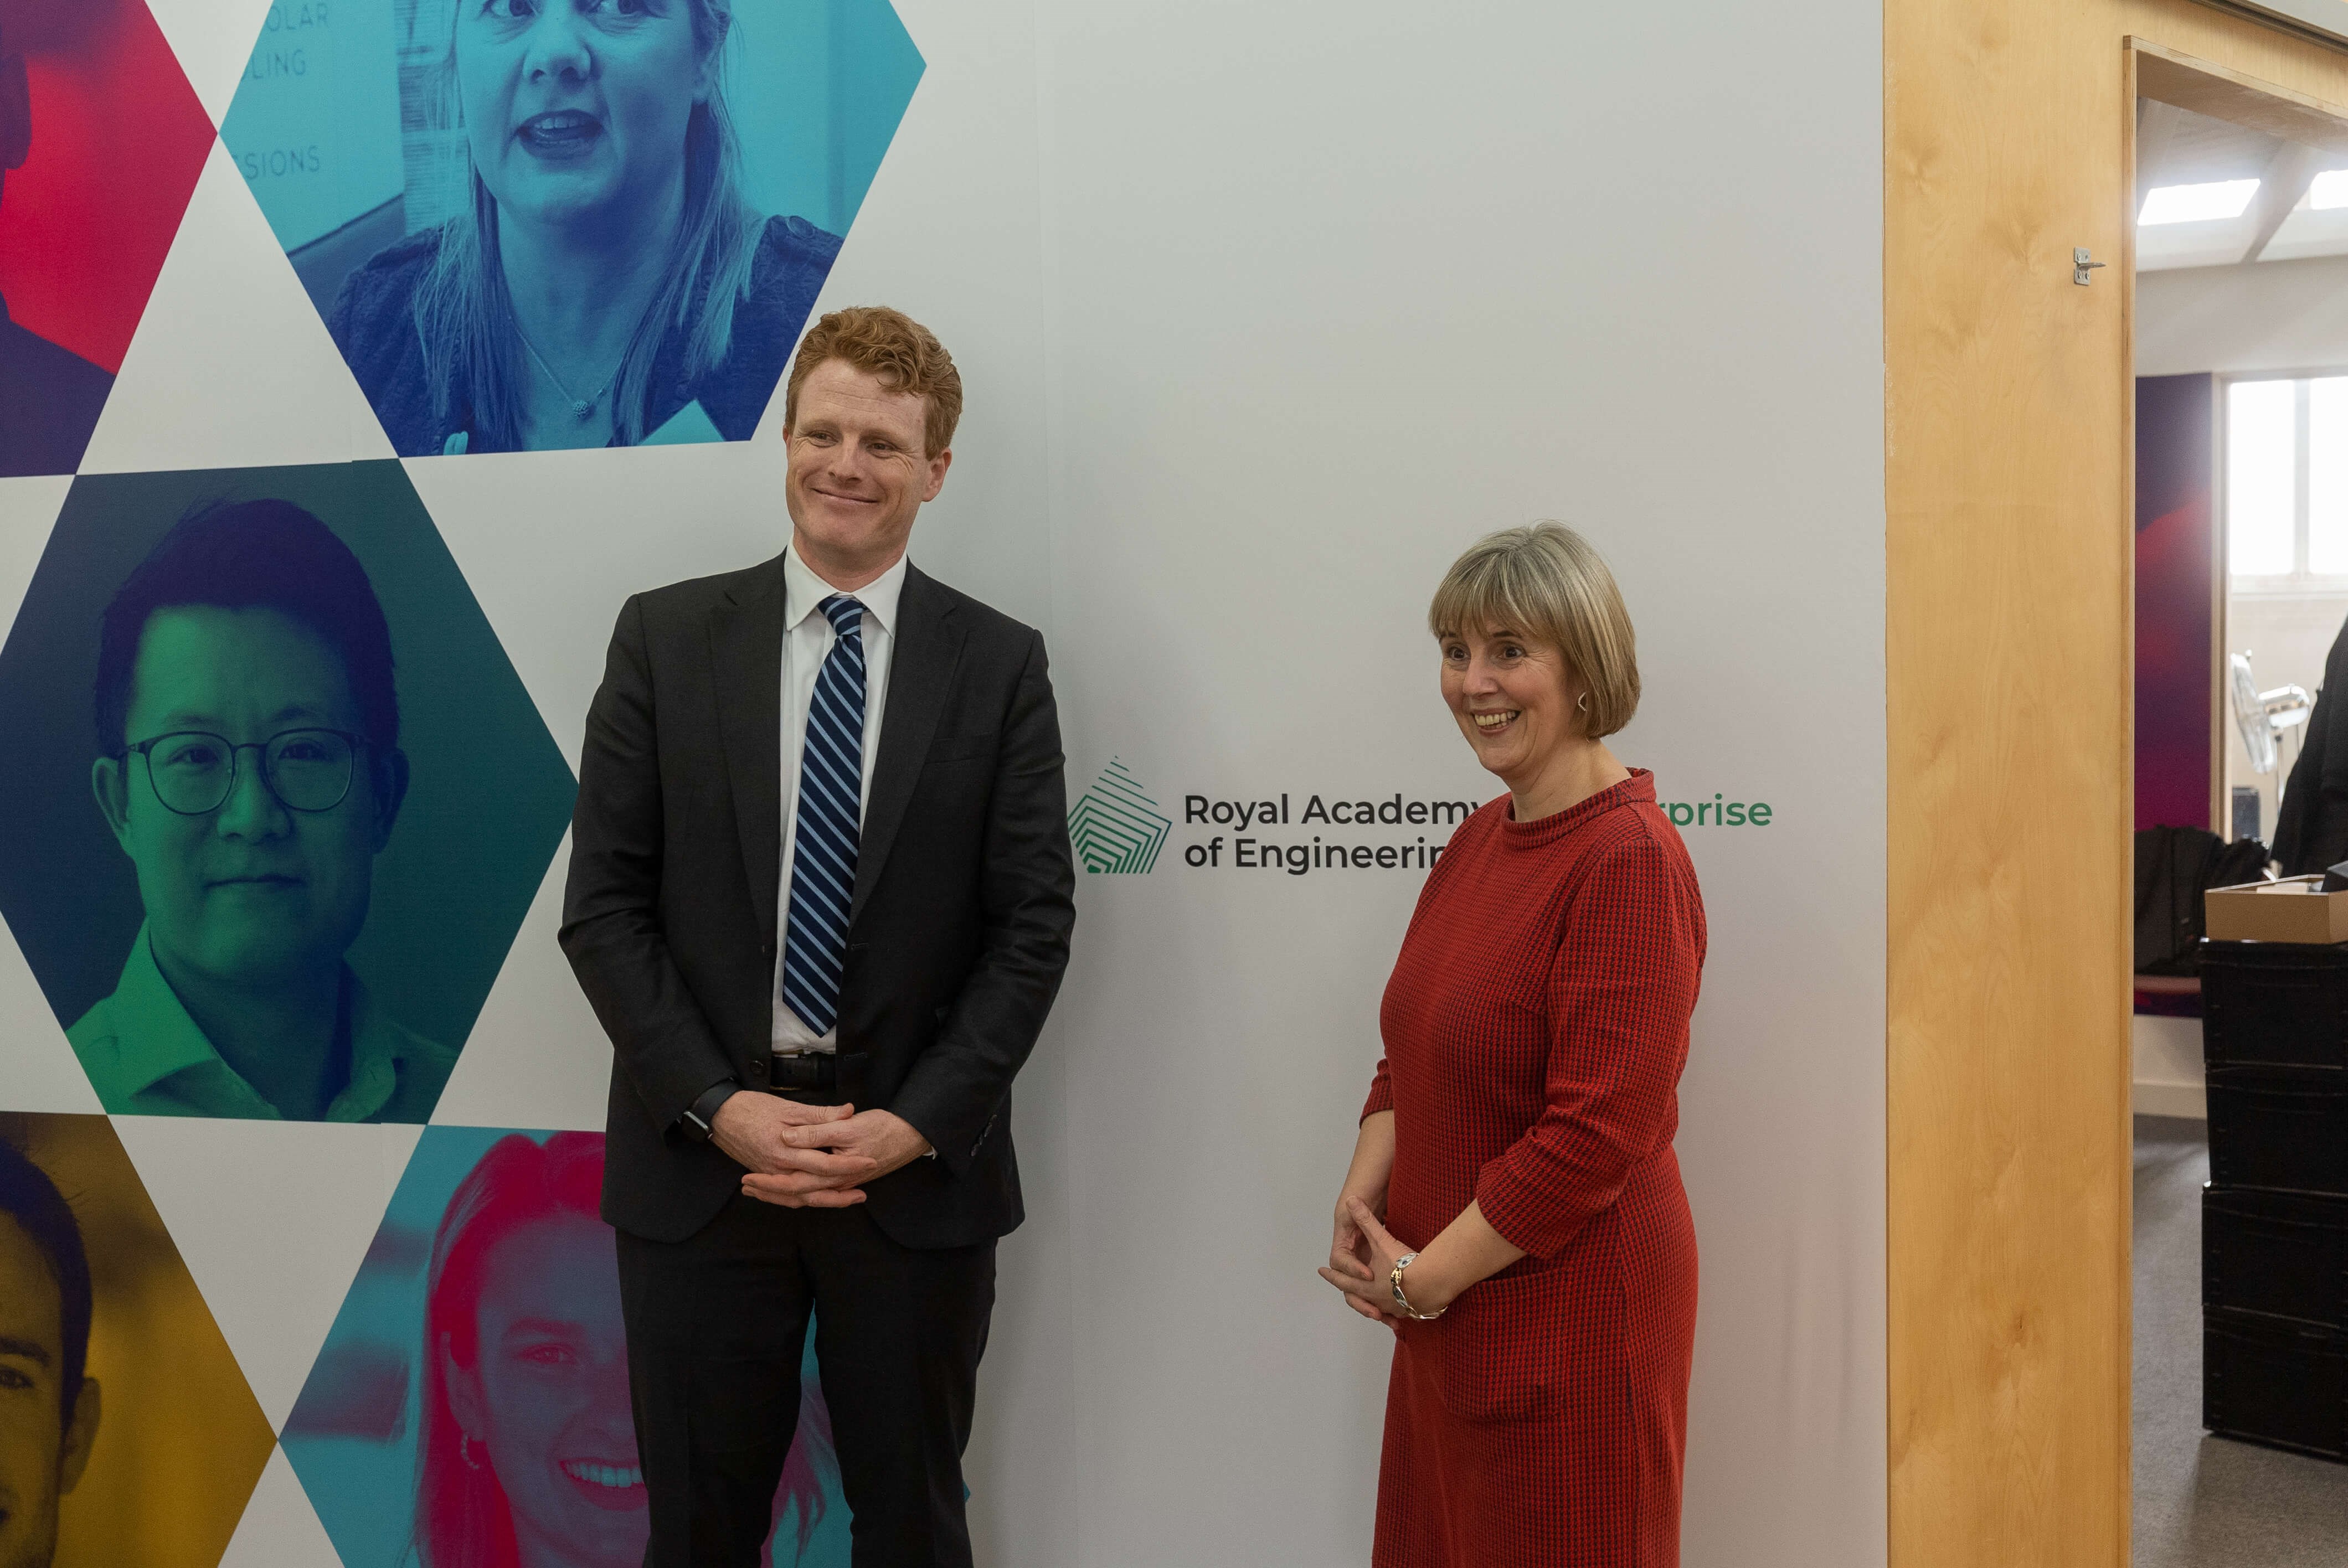 US Special Envoy to Northern Ireland for Economic Affairs, Joseph Kennedy III, visited the Enterprise Hub at Ormeau Baths in Belfast